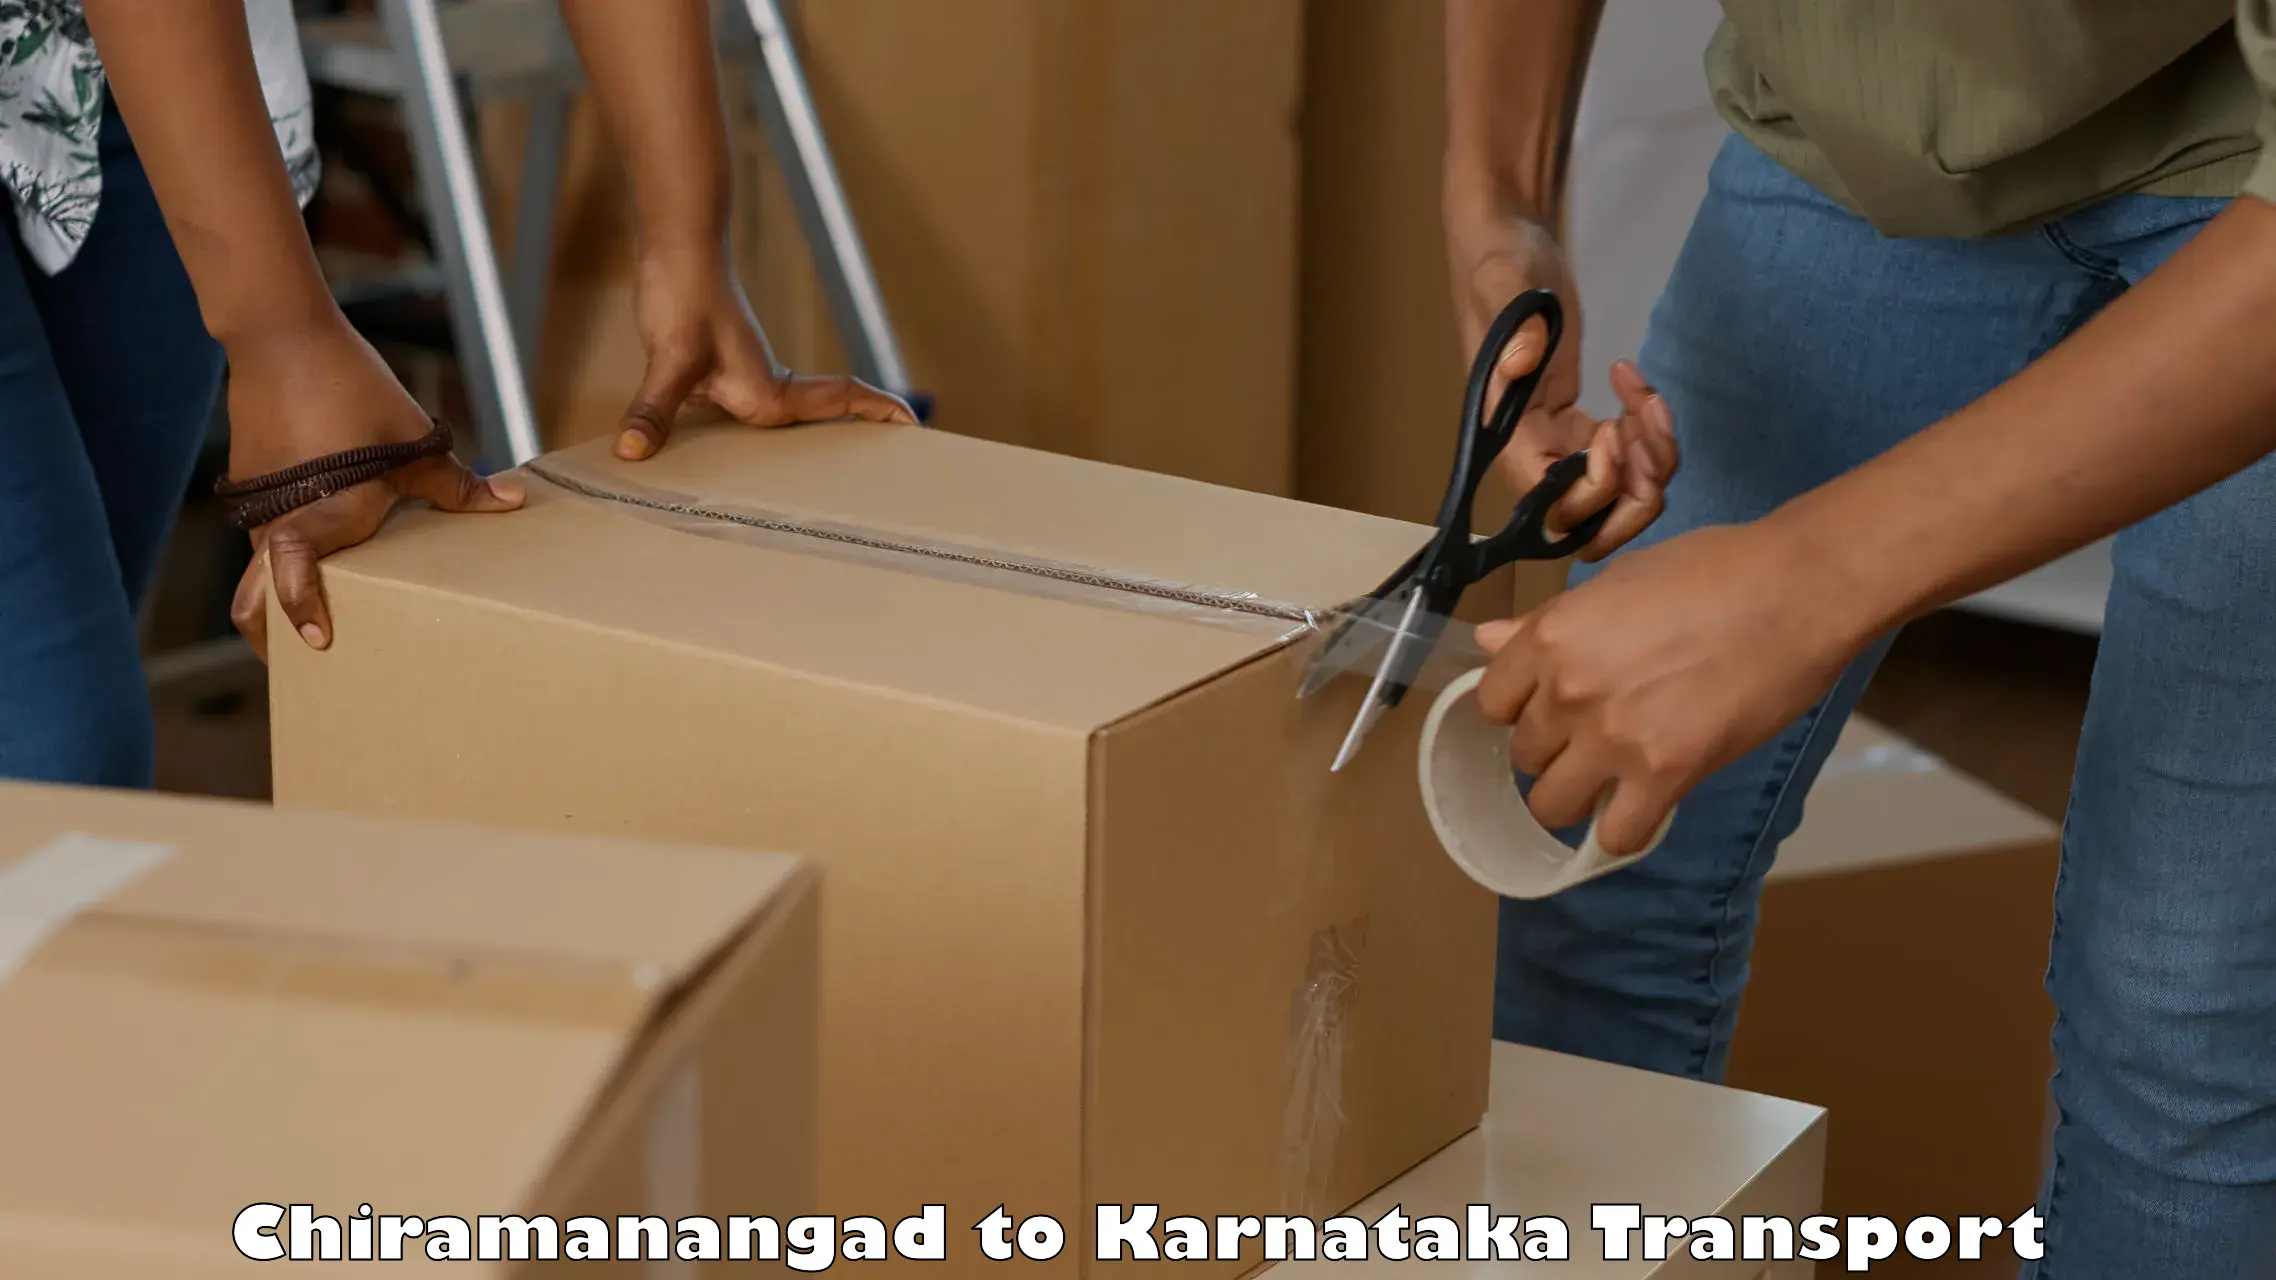 Goods delivery service Chiramanangad to Tumkur